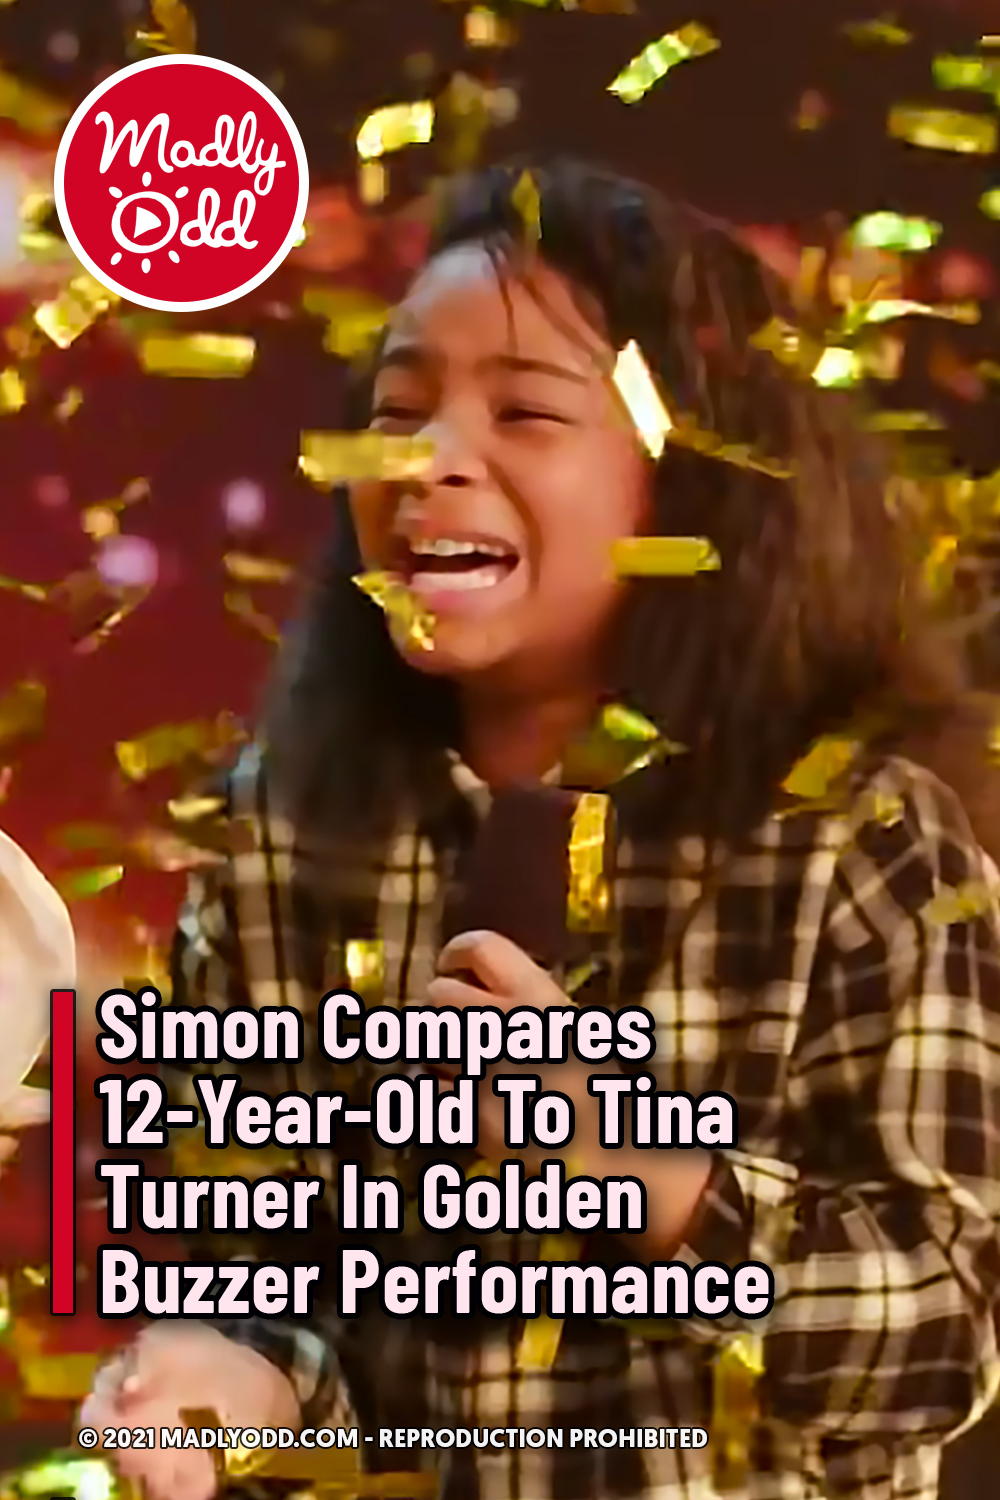 Simon Compares 12-Year-Old To Tina Turner In Golden Buzzer Performance